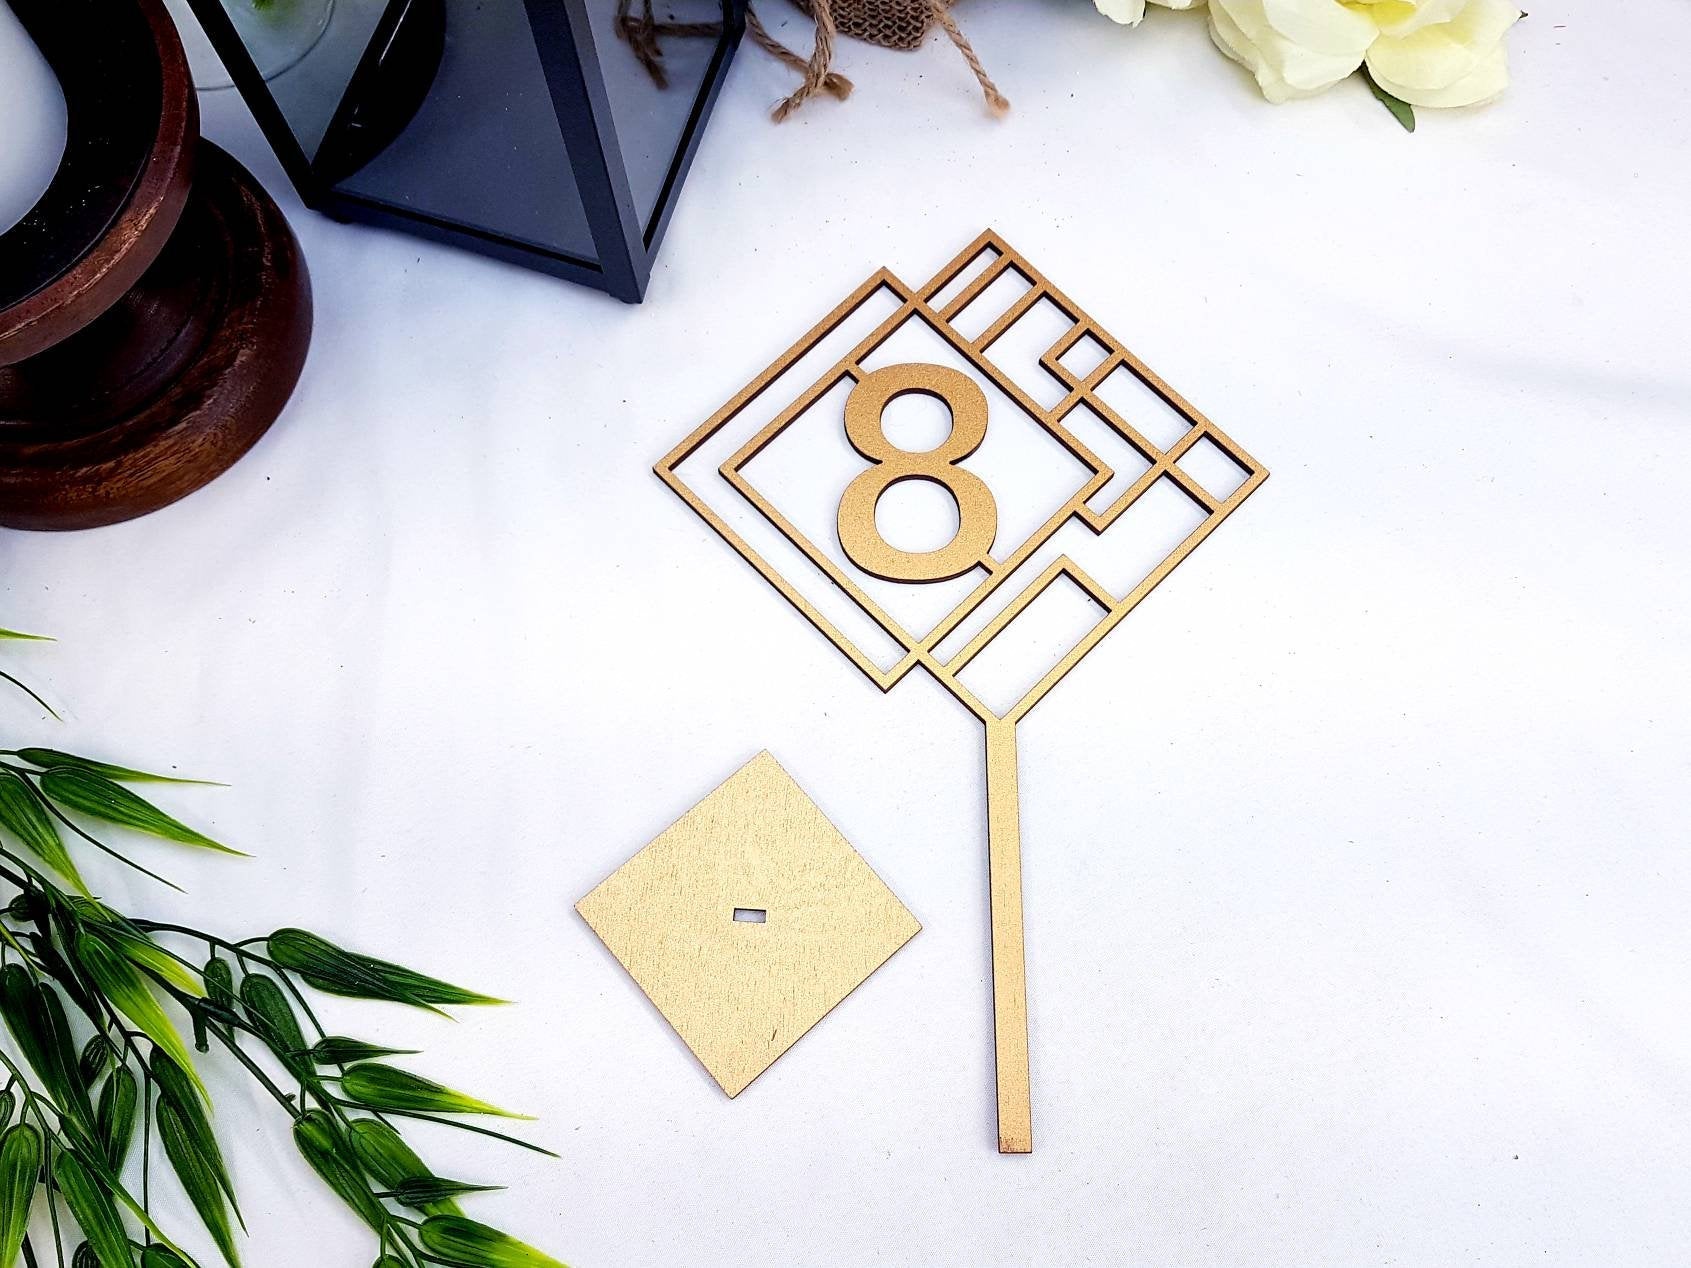 Art Deco Table Numbers